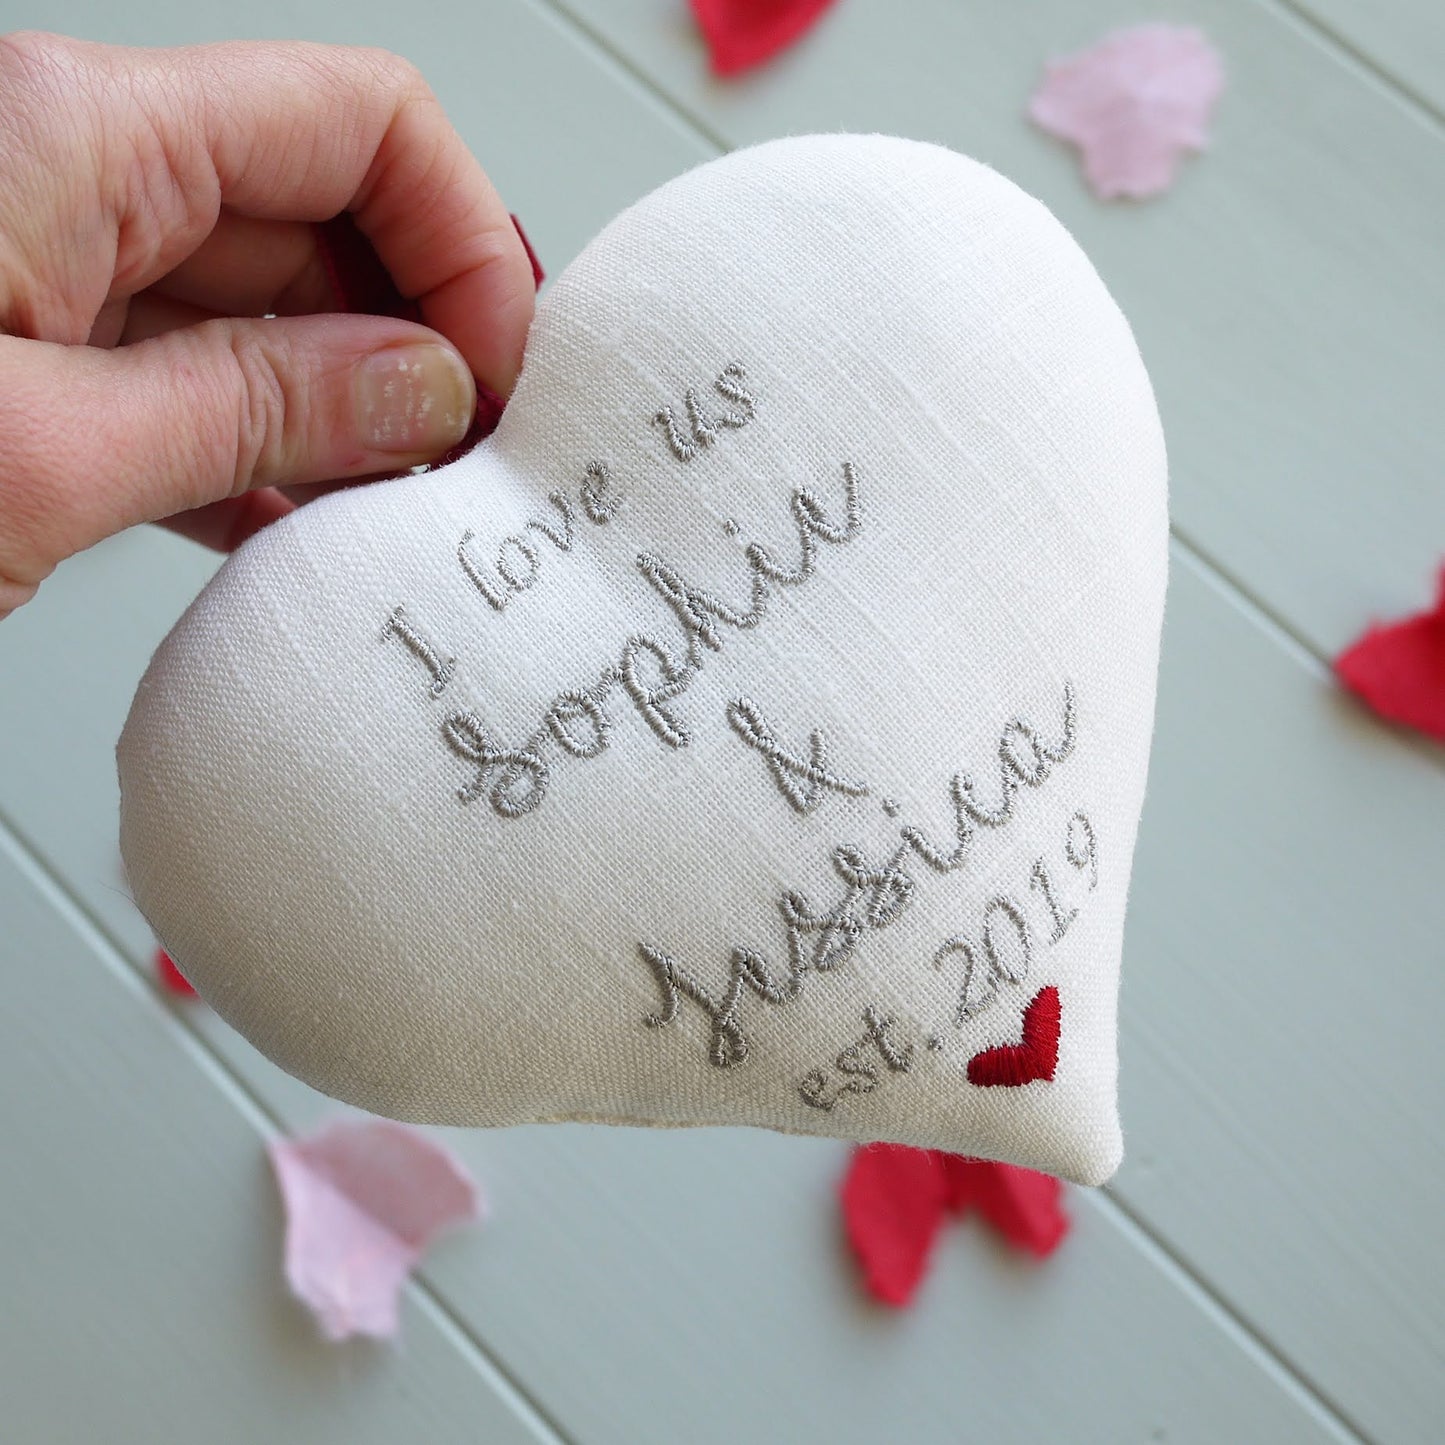 Valentines Day ’I Love Us’ Gift Heart Personalised Valentine’s Day Gifts